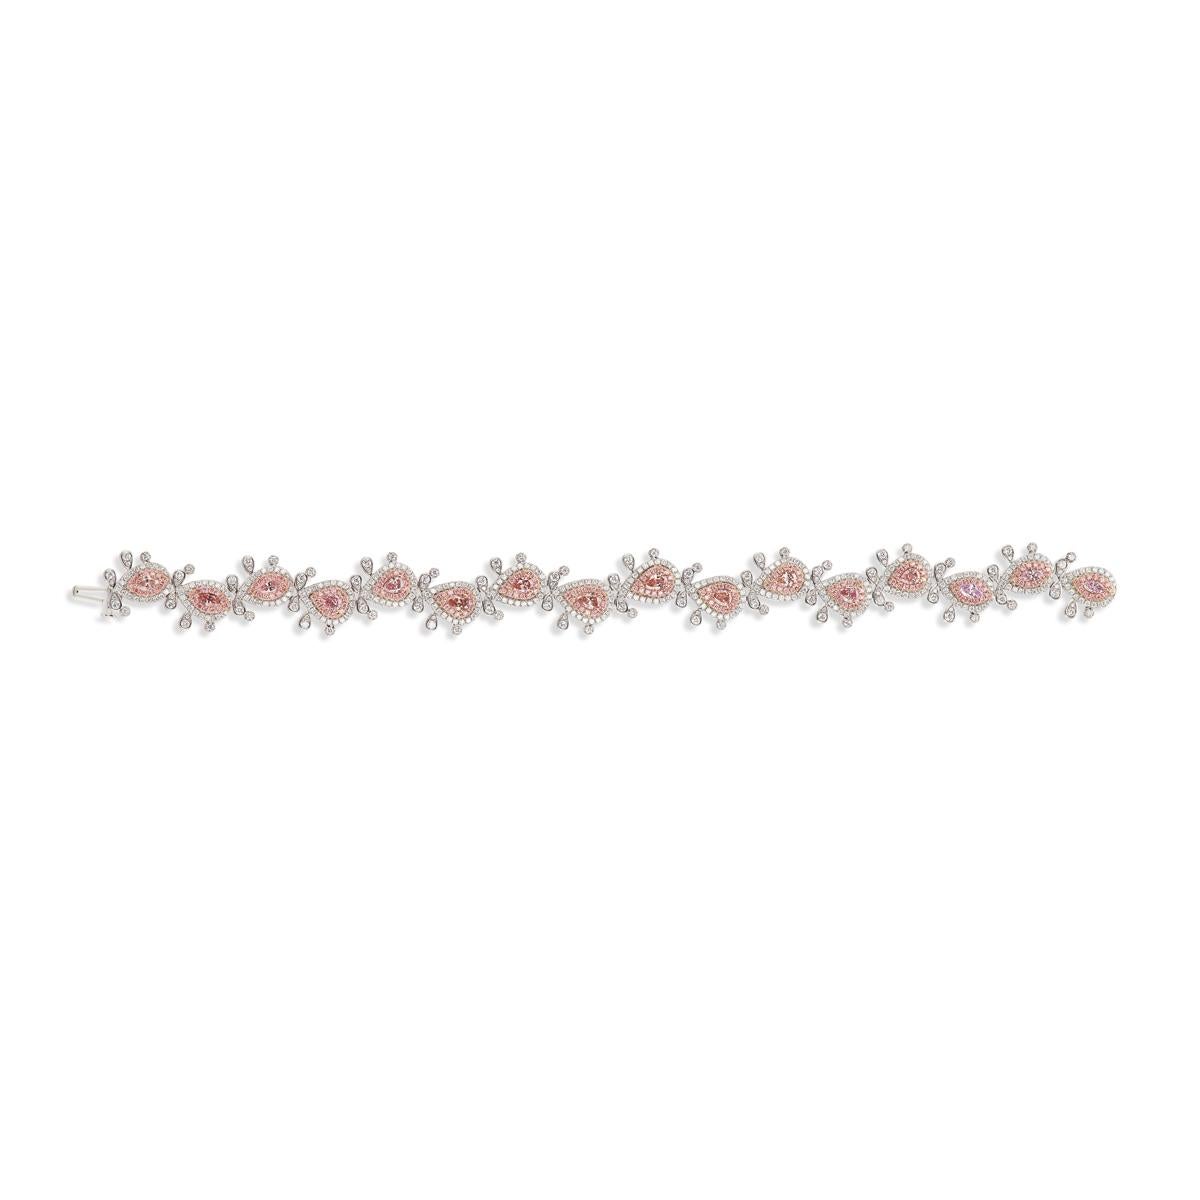 The Fancy Pink Diamond Bracelet  Has A Fancy Pink Diamond 10 Piece of Pear Shape  & 6 Piece Marquise total of 2.20 cts  Diamond Pink melee 200 Piece 0.92 cts And White 454 Piece 2.04 cts.  Total of 5.81 cts 
There Are 2 Pink Diamond Are Randomly